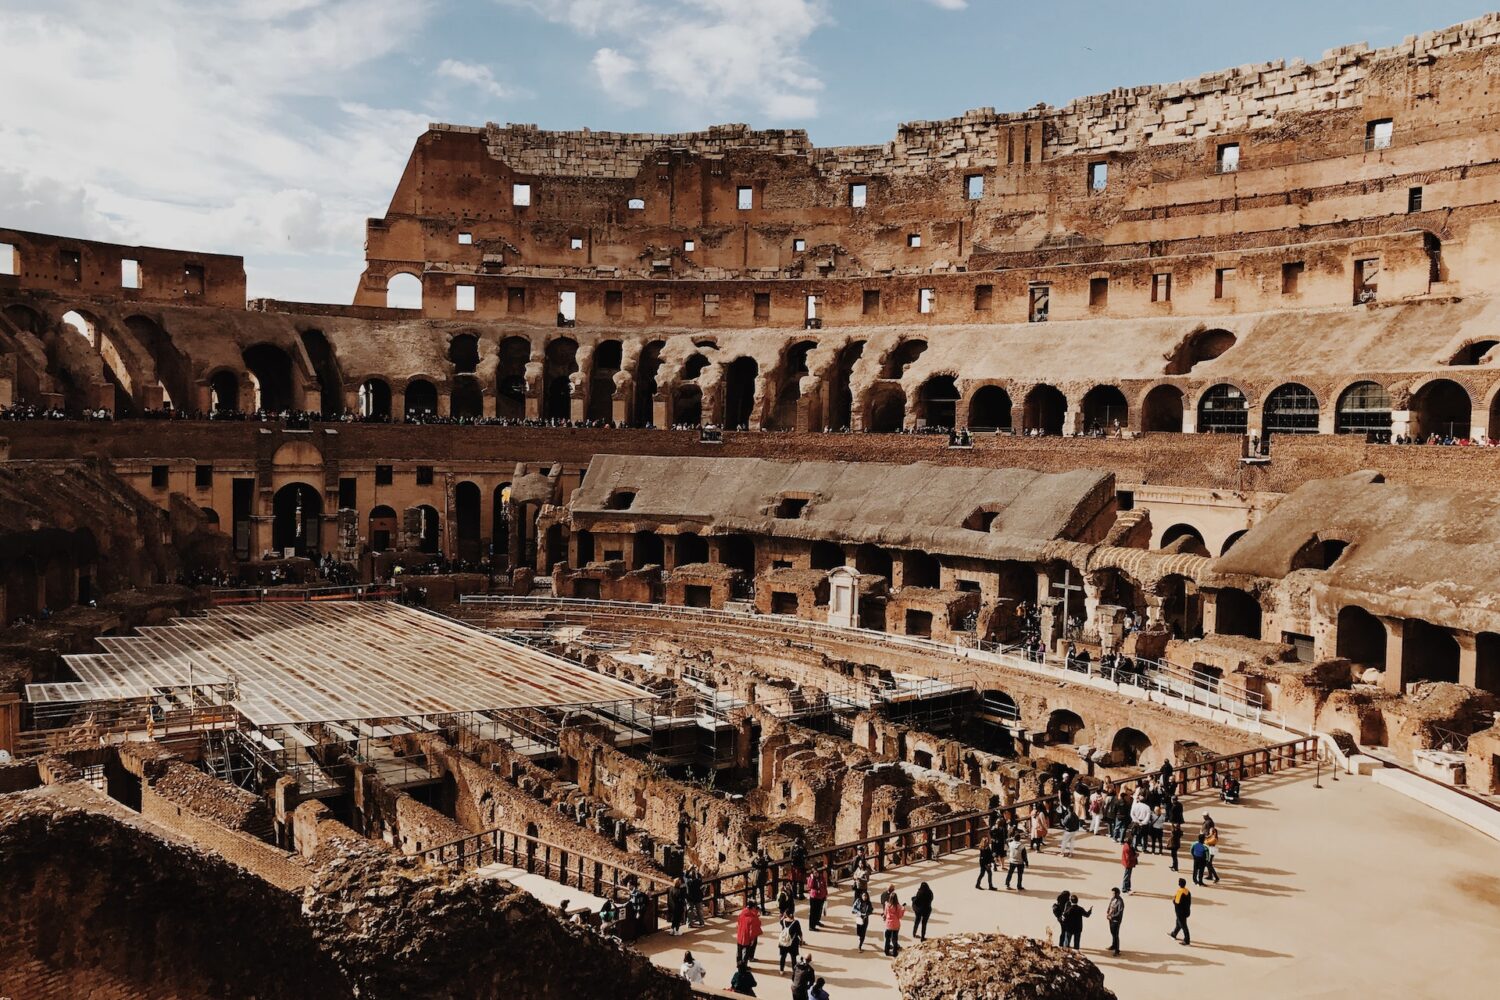 Romeone day: vintage version of Colosseum